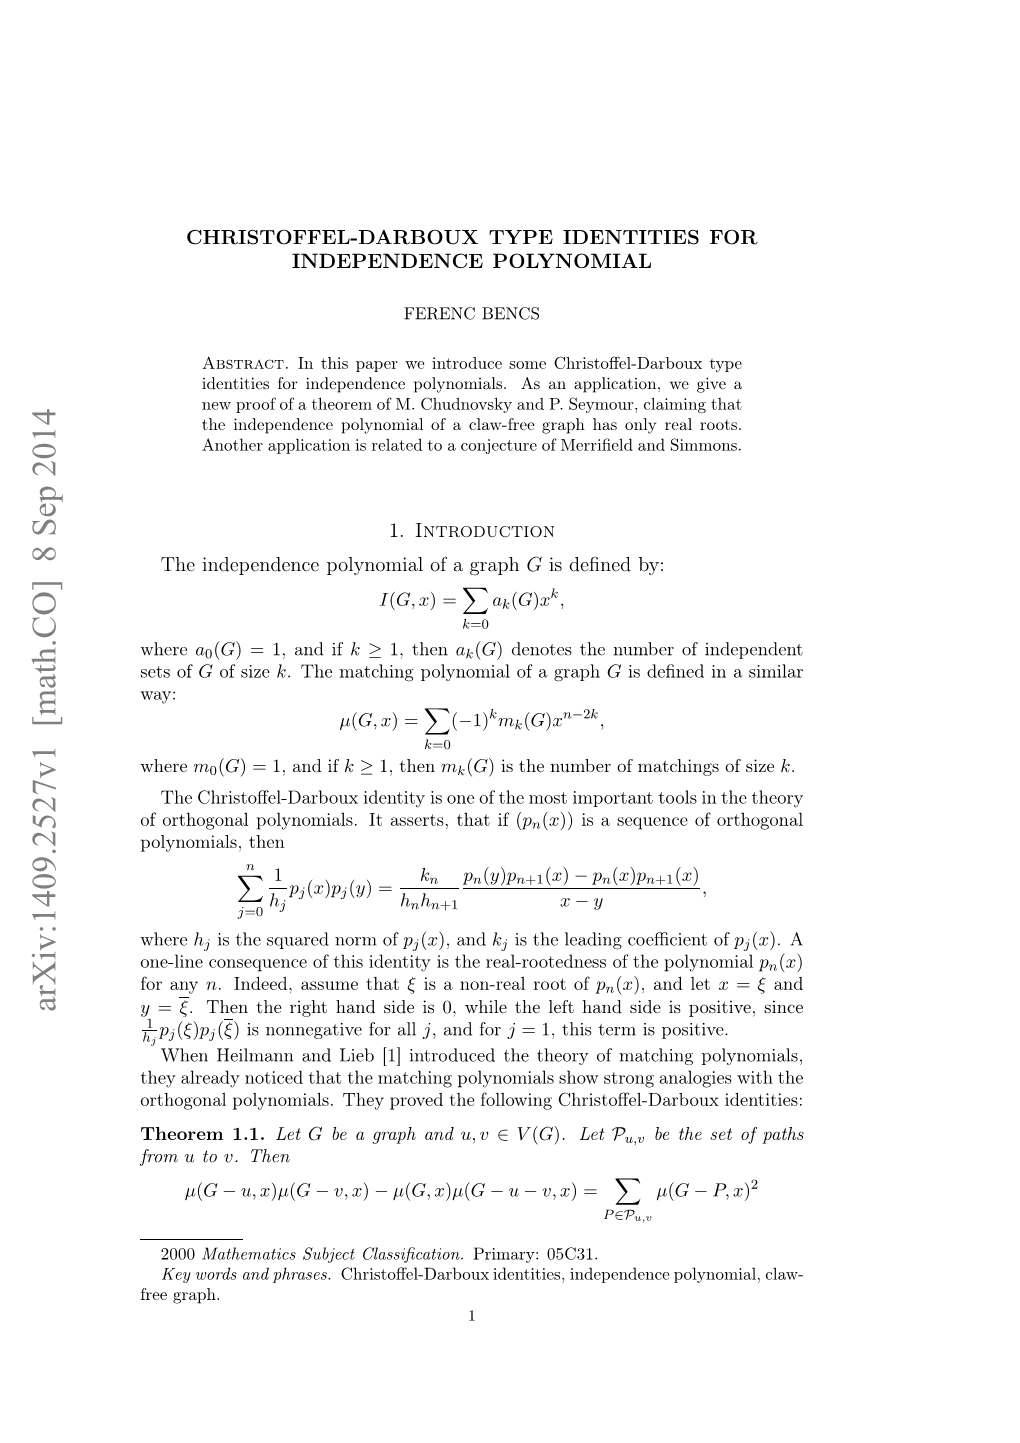 CHRISTOFFEL-DARBOUX TYPE IDENTITIES for INDEPENDENCE POLYNOMIAL3 Conjecture Turned out to Be False for General Graphs, As It Was Pointed out in [3]